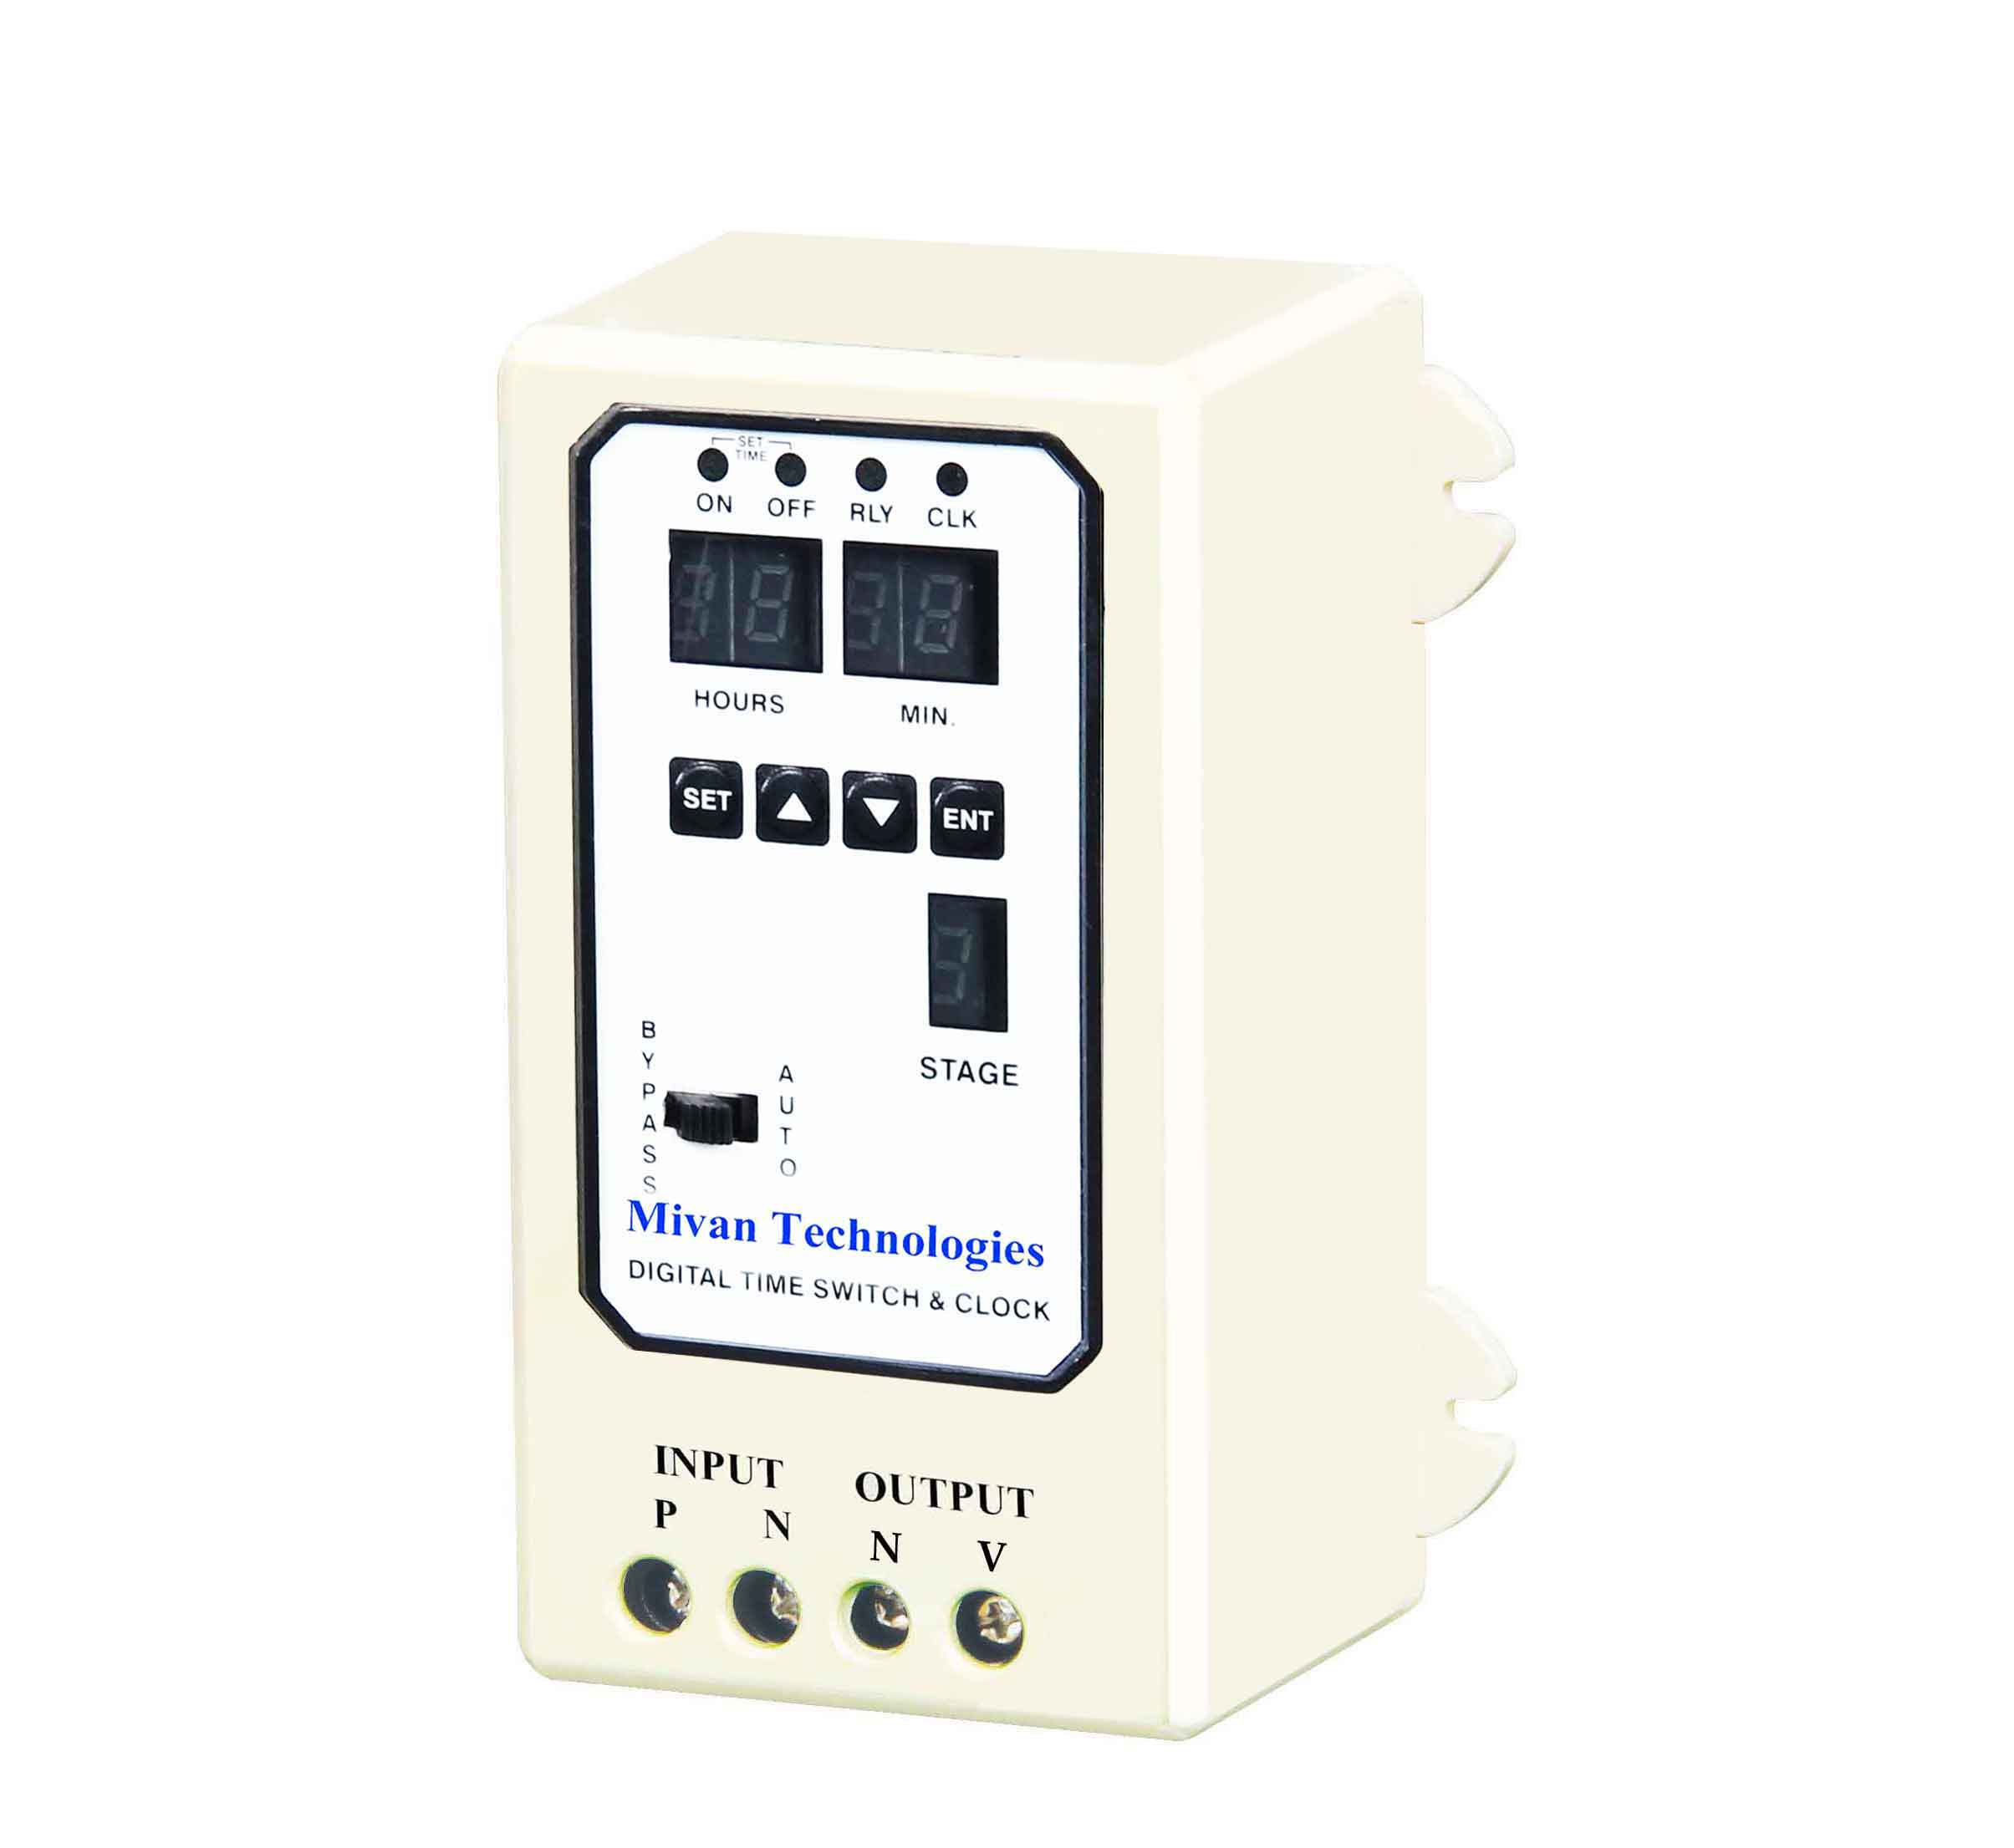 DTS 106 4 Digital Time Switch and Clock suitable for single phase push button type panel